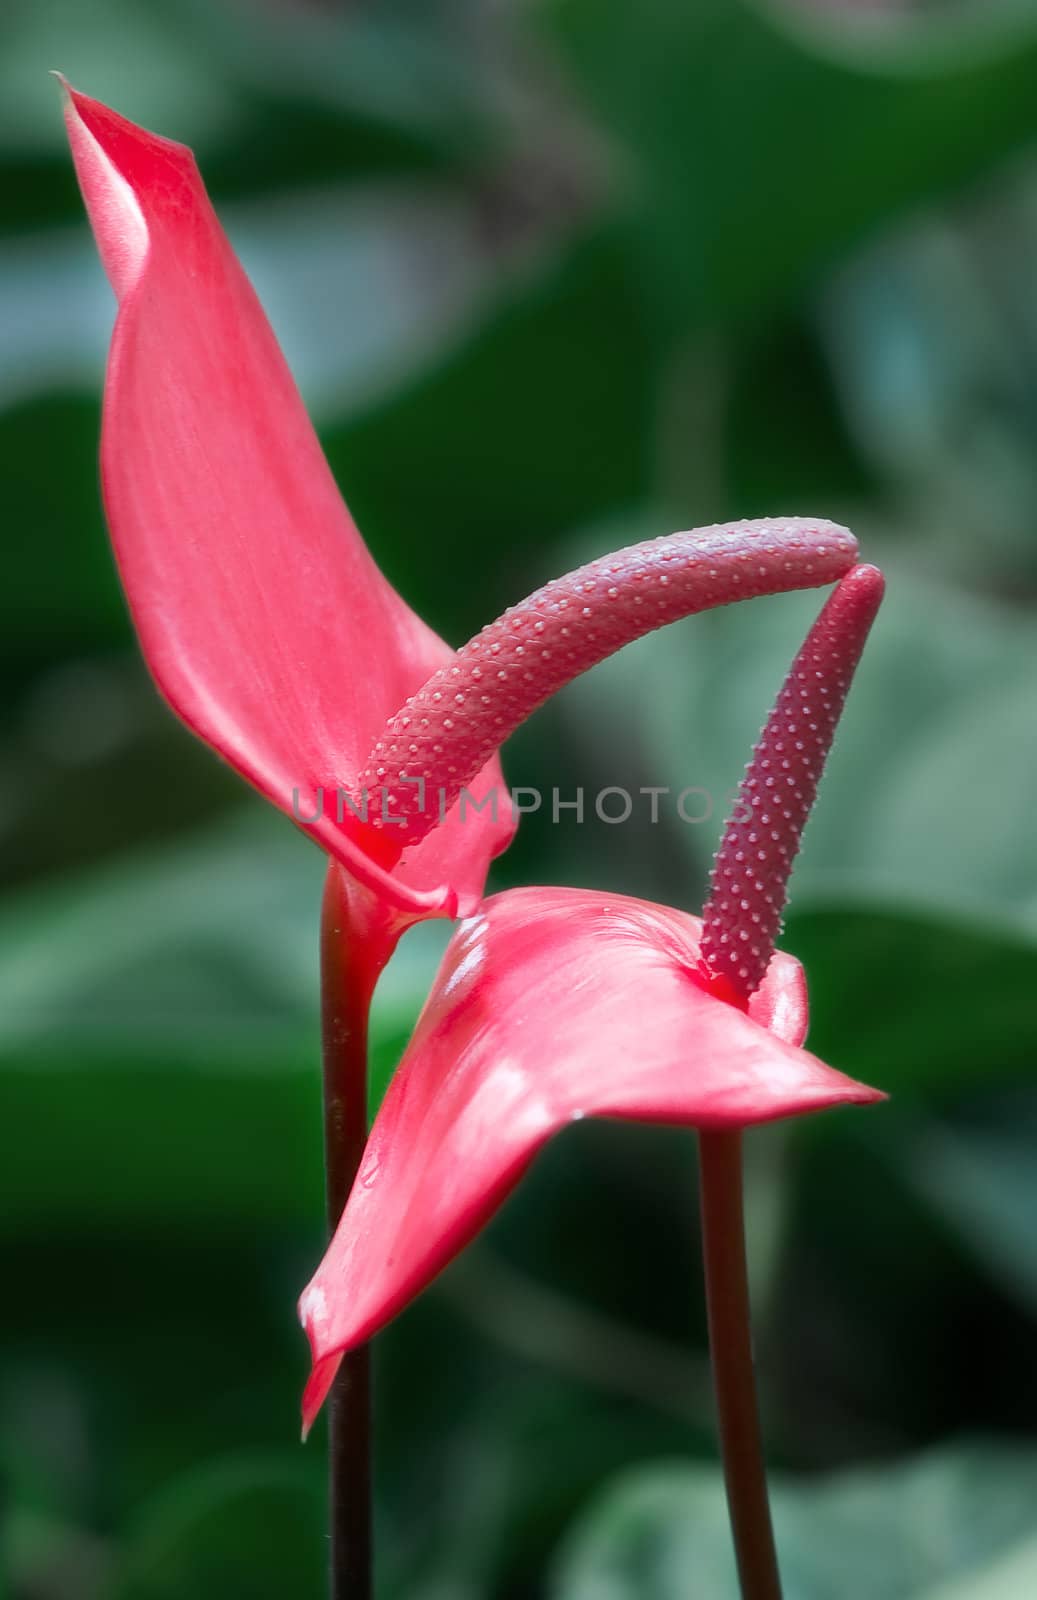 Vertical oriented image of two red anthuriums and blurry green leafs on background.